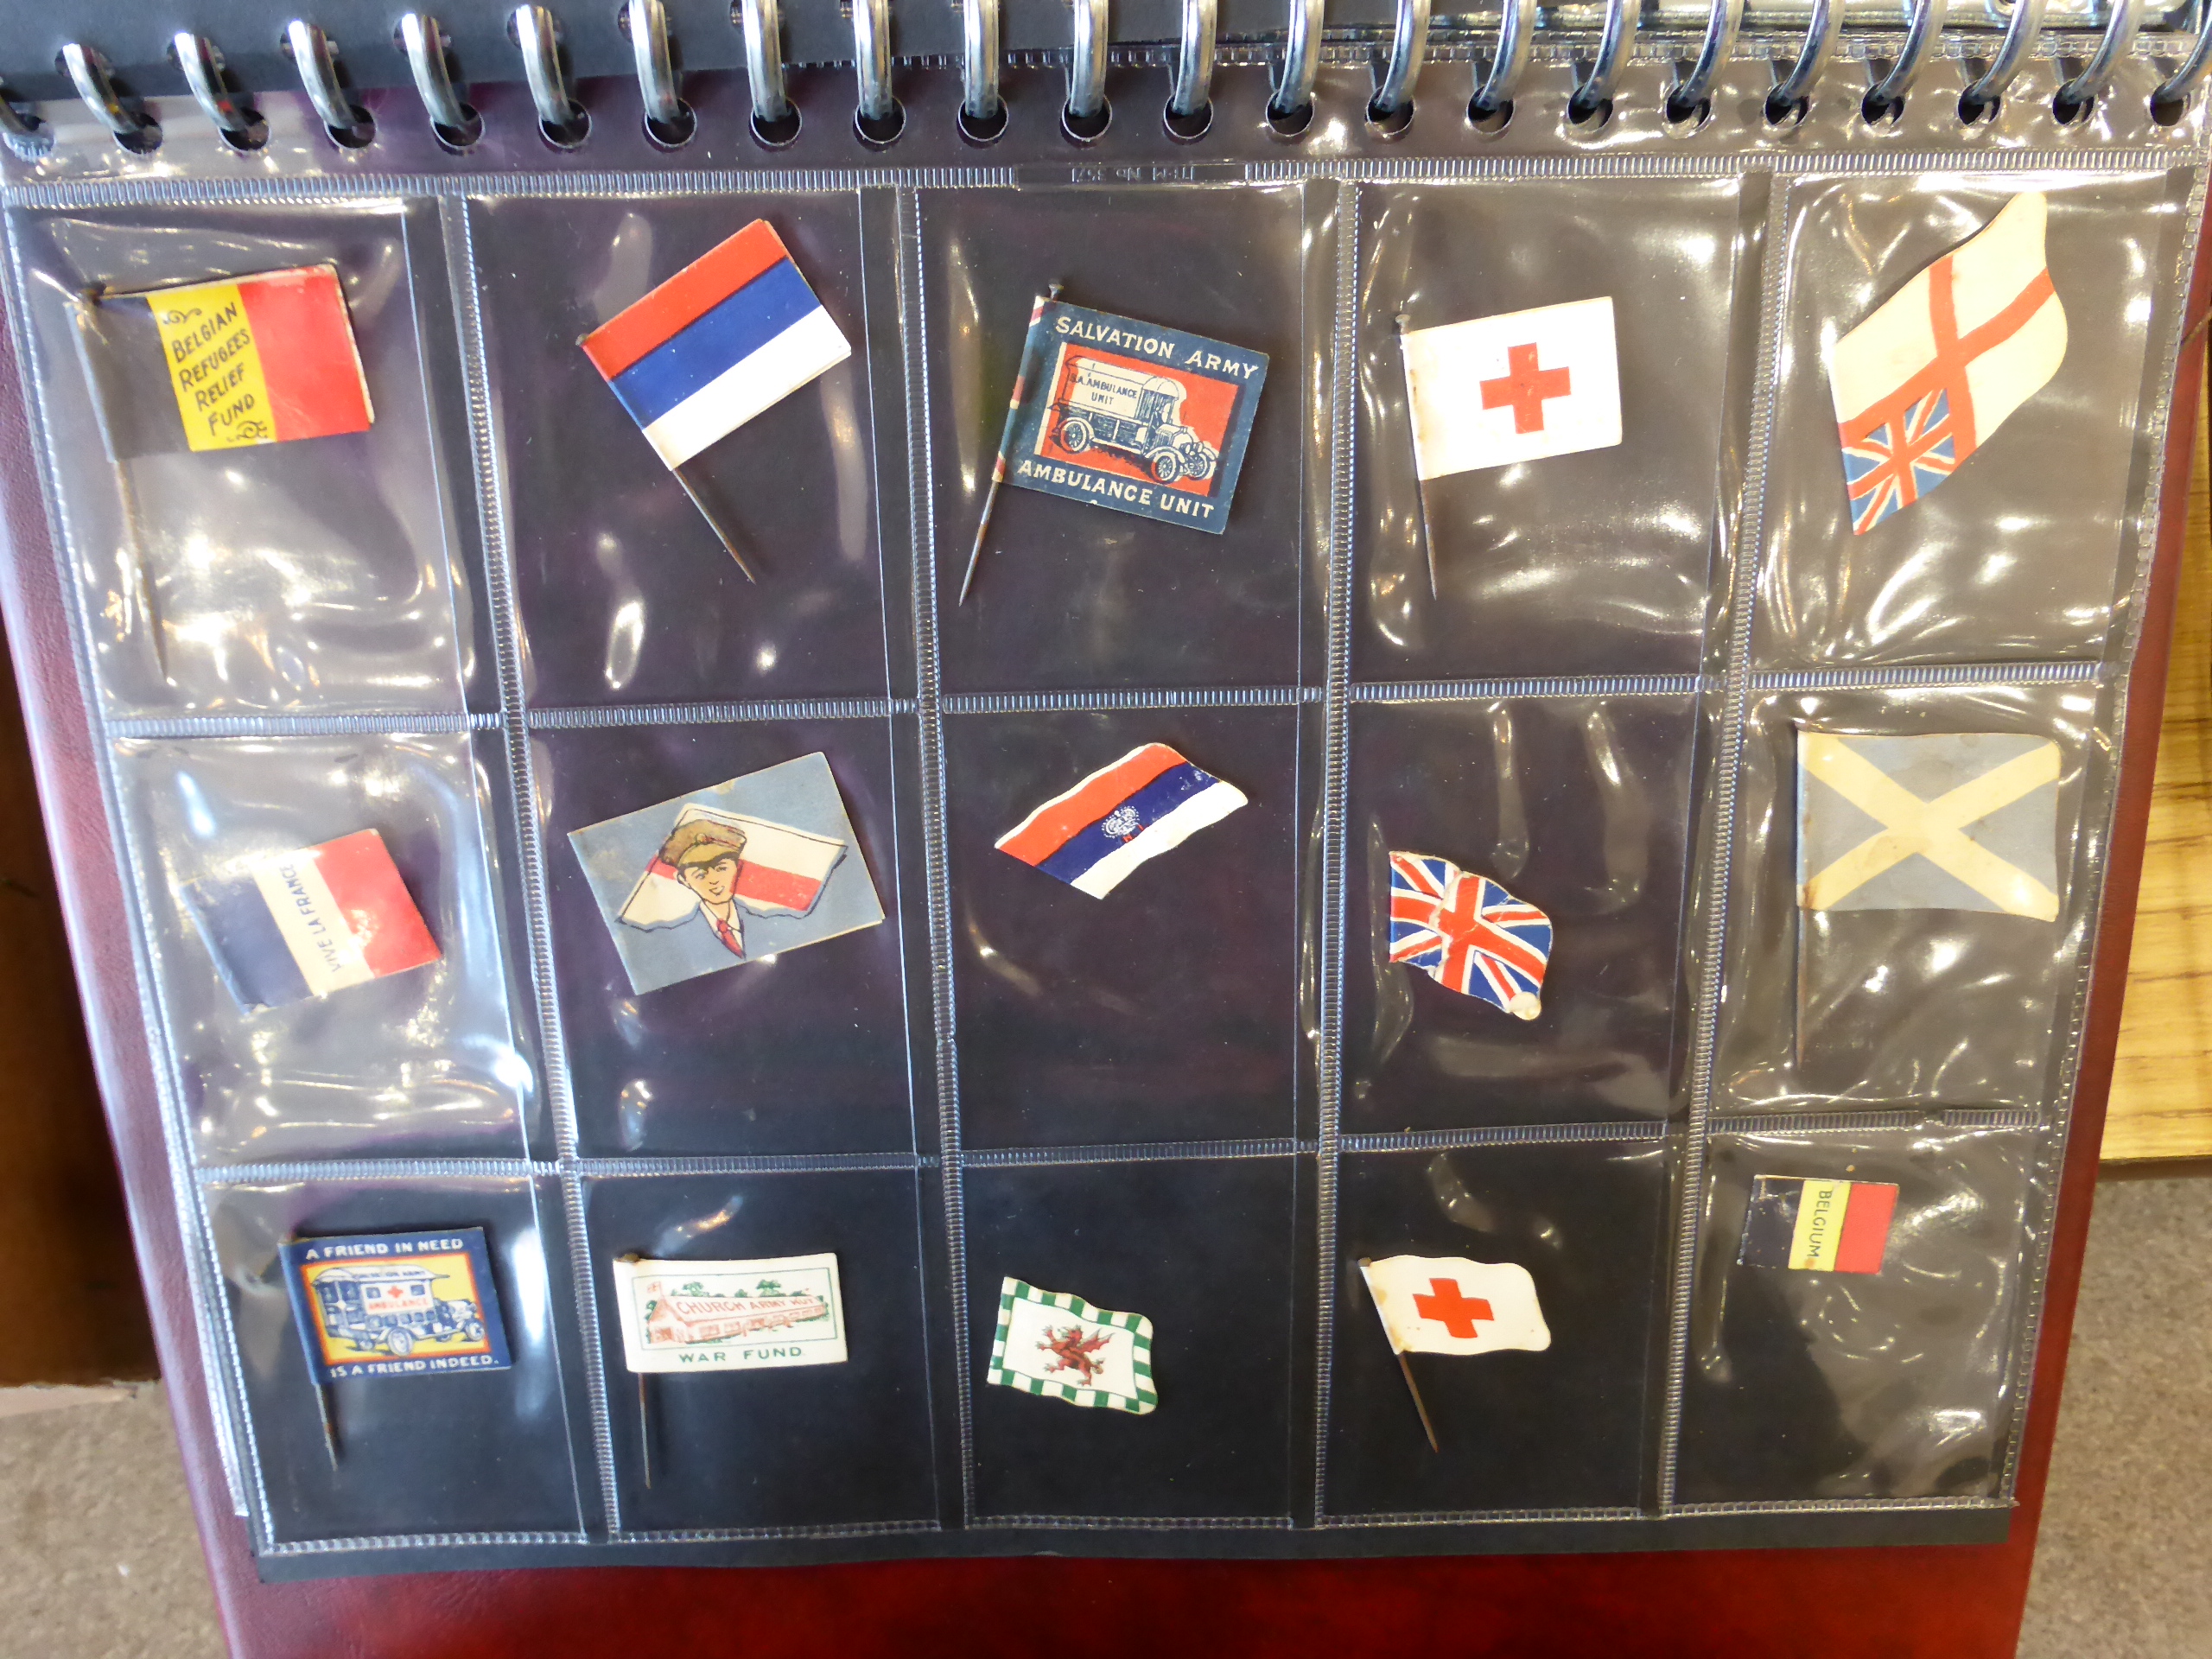 A Collection of 130 Early 20th Century Flag Day Badges and Ribbons, including WWI patriotic causes - Image 10 of 10